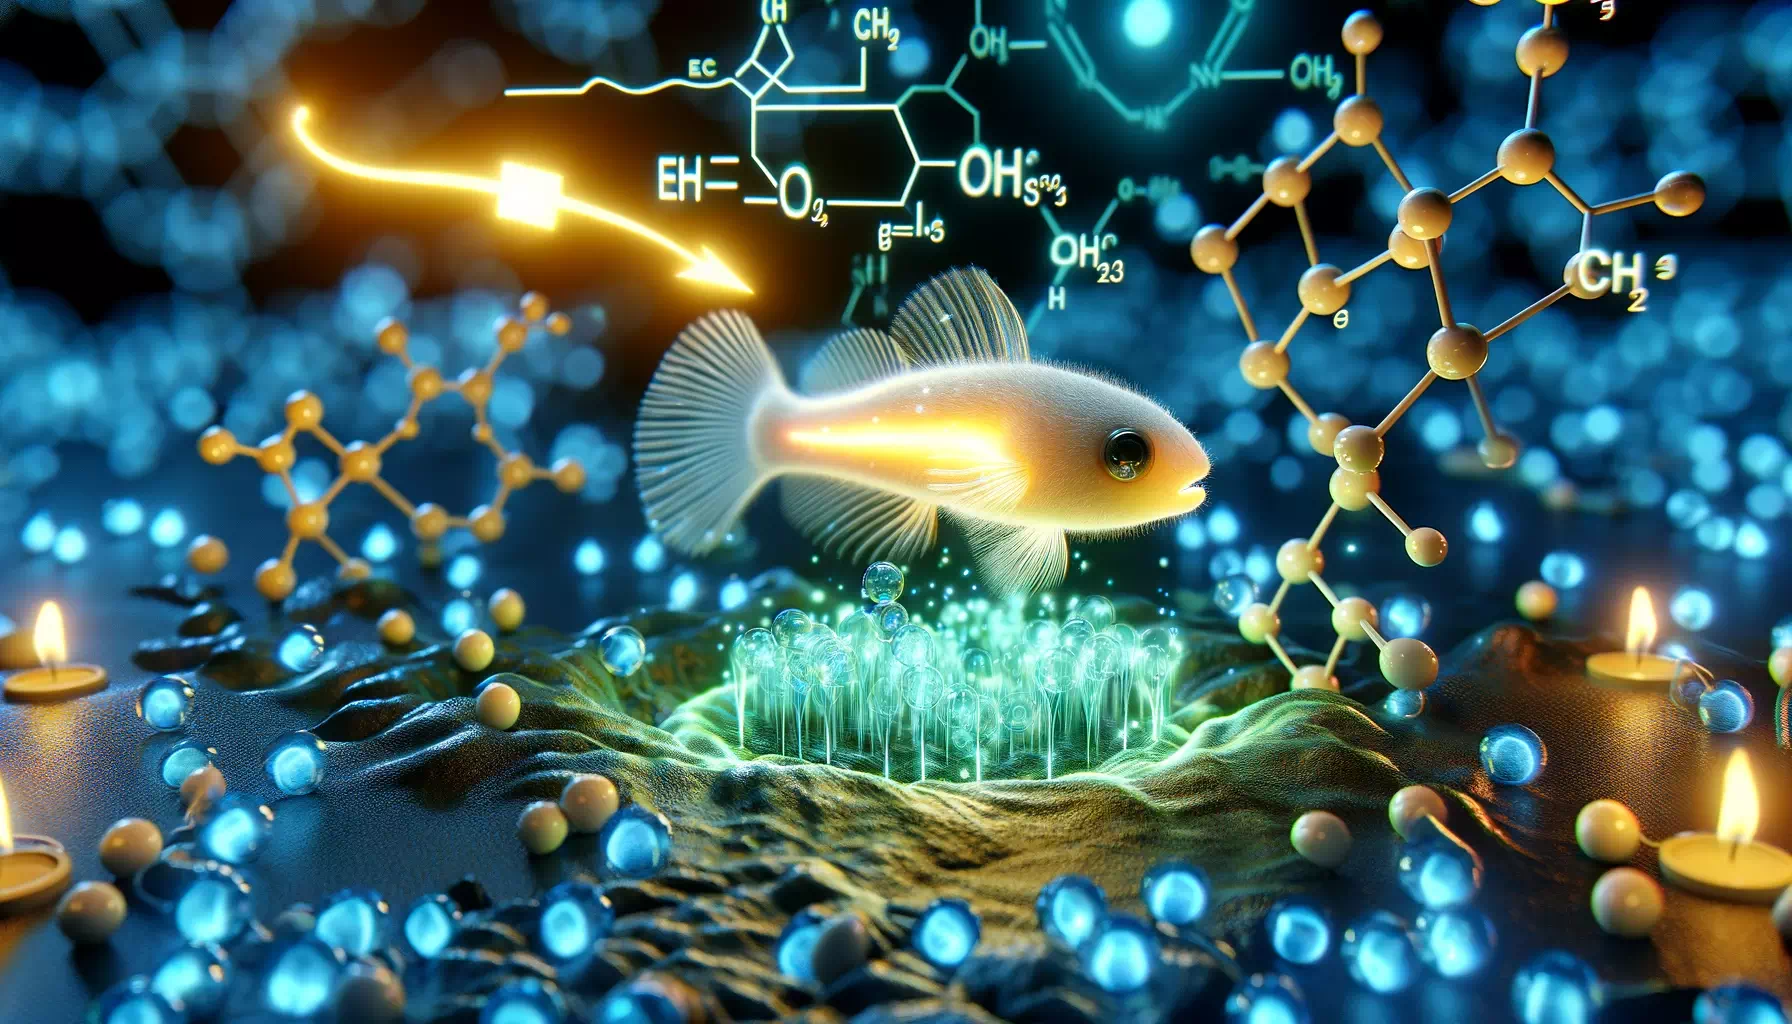 chemistry of bioluminescence, focusing on the enzyme luciferase in the context of GloFish. The image should be realistic